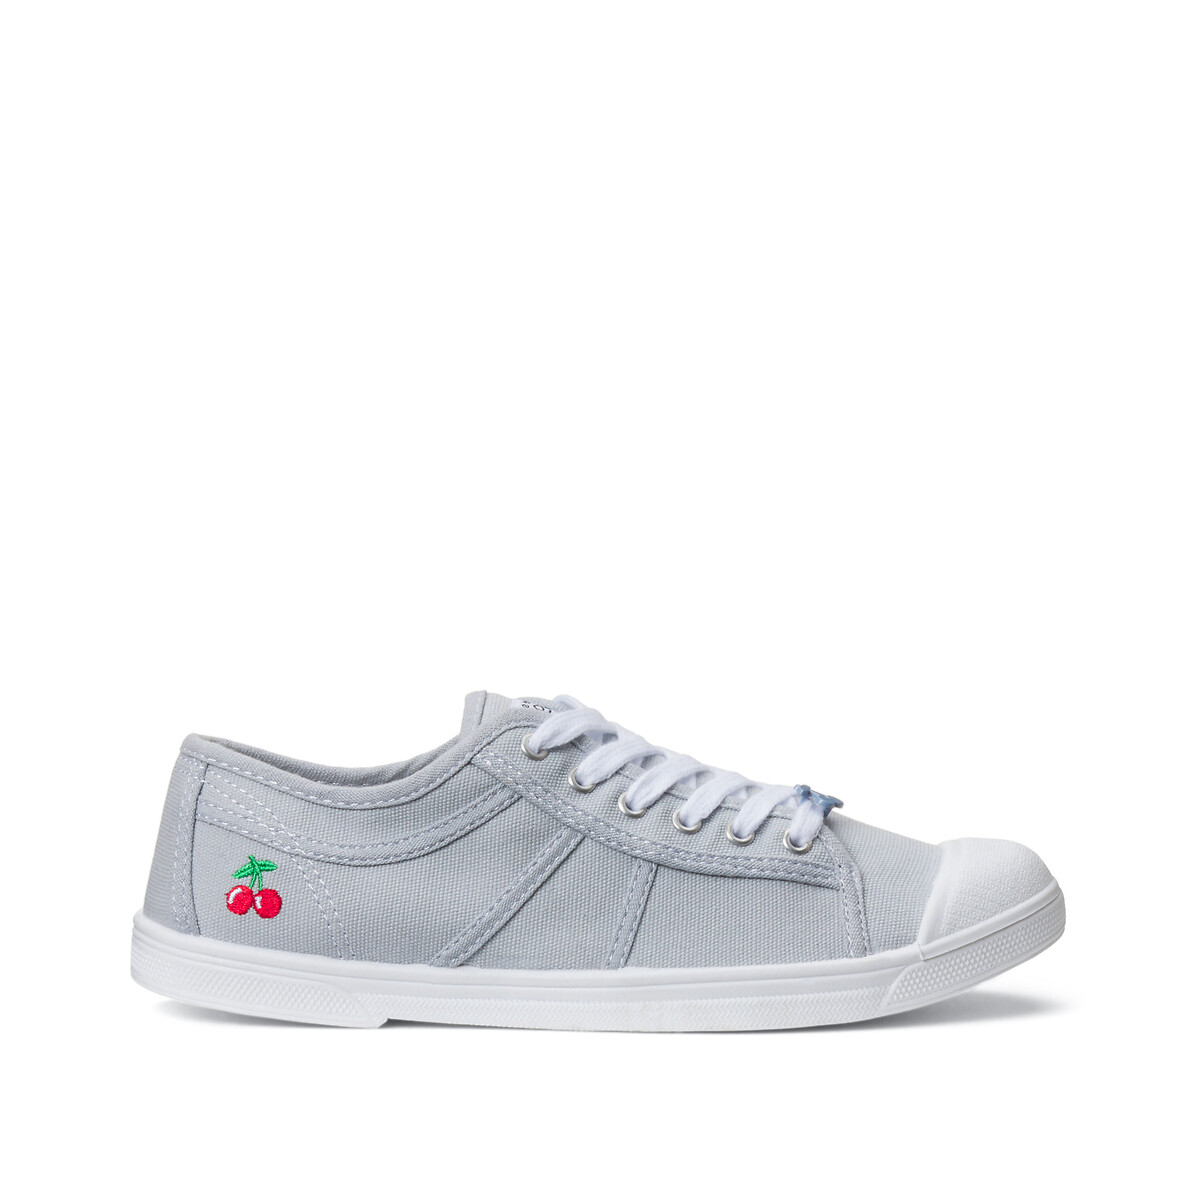 LTC Basic 02 Trainers in Canvas